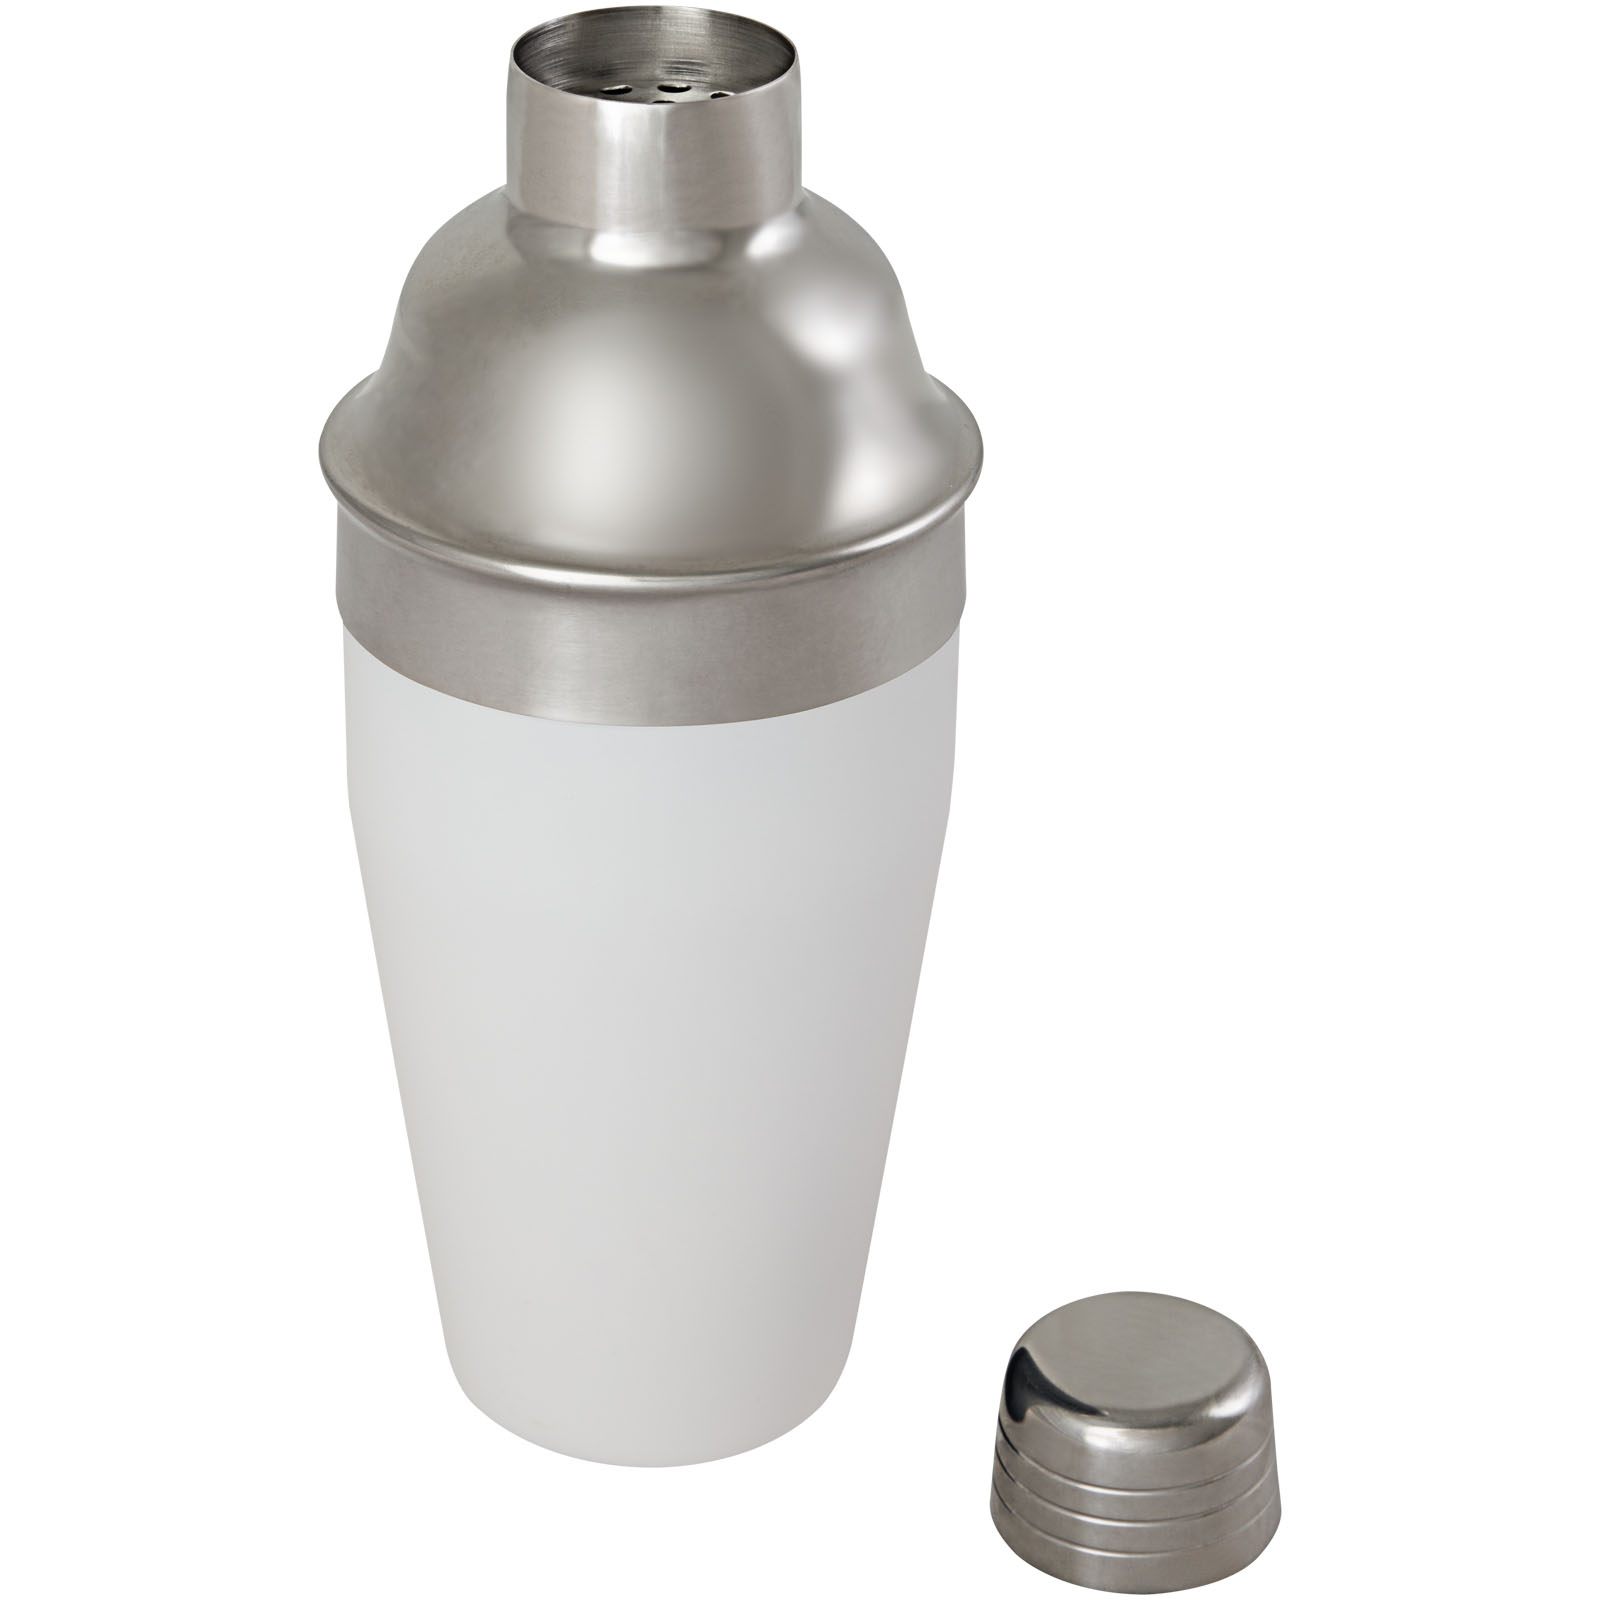 Home Accessories - Gaudie recycled stainless steel cocktail shaker